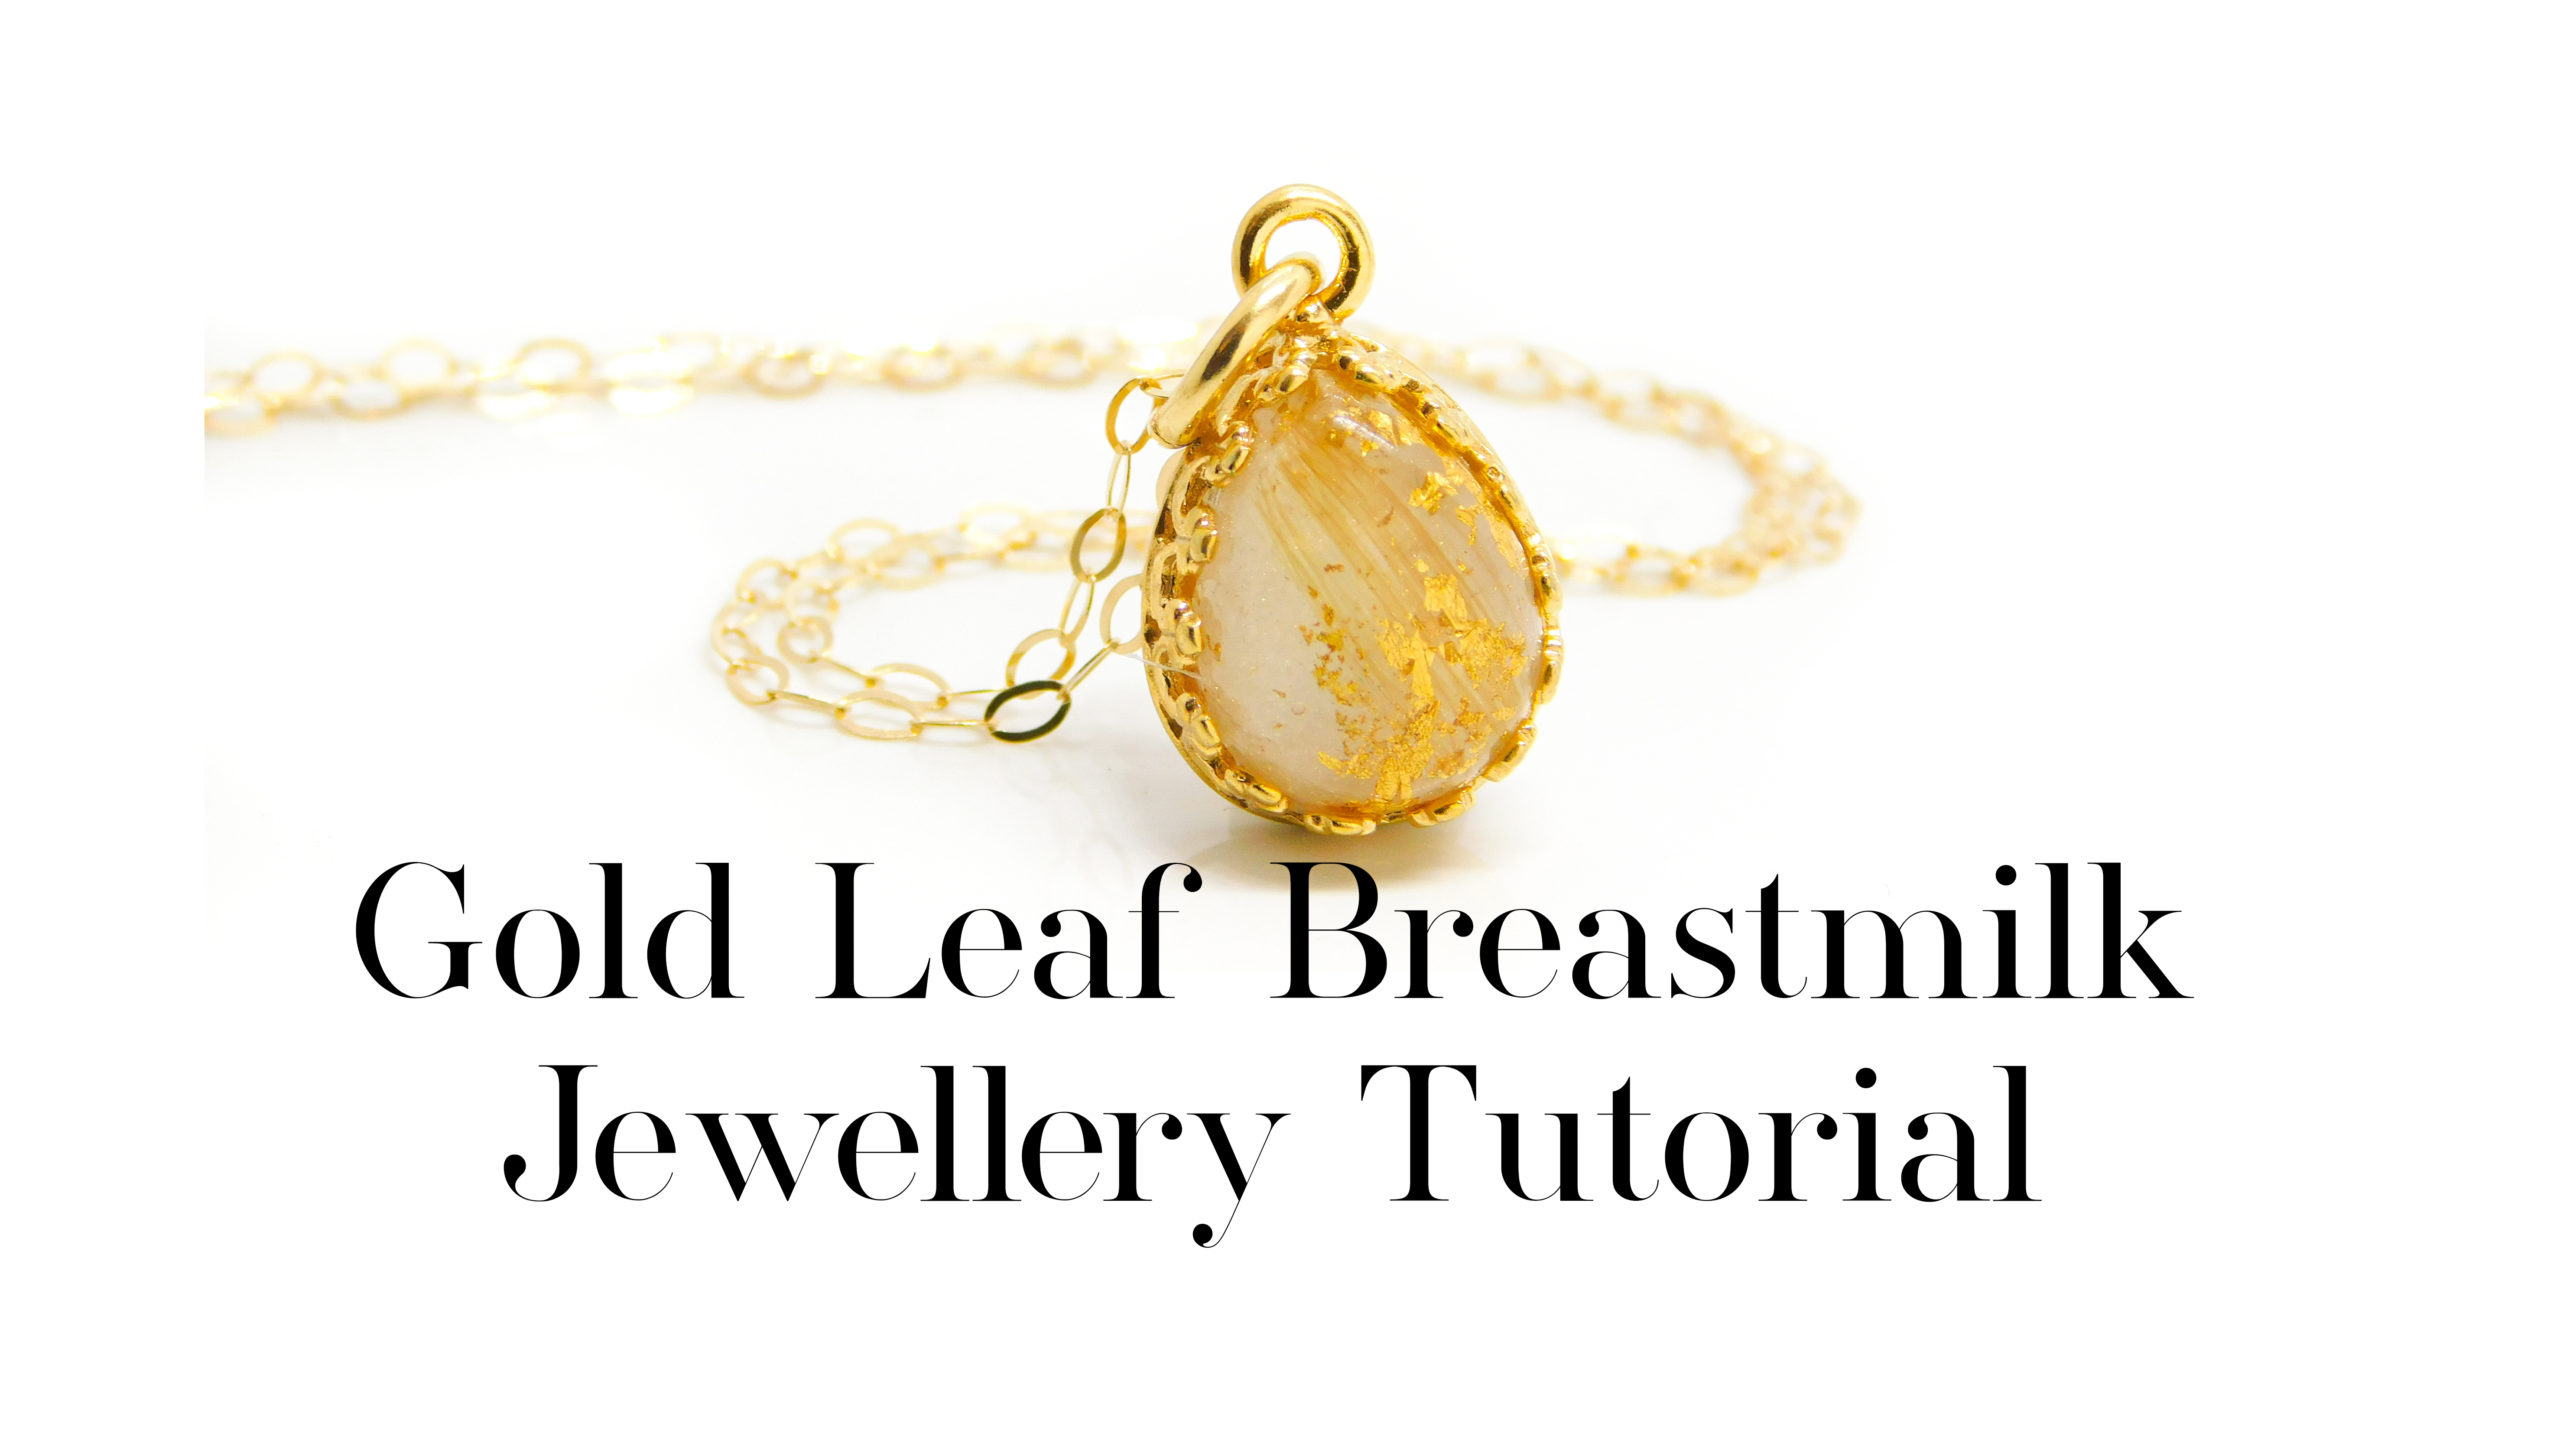 Gold Leaf Breastmilk Jewellery Tutorial YouTube thumbnail solid gold breastmilk teardrop necklace, breastmilk with gold leaf and diamond powder, pearly gold sparkle mix and a lock of blonde hair. Hallmarked solid 9ct gold teardrop crown point setting with lightweight solid gold chain